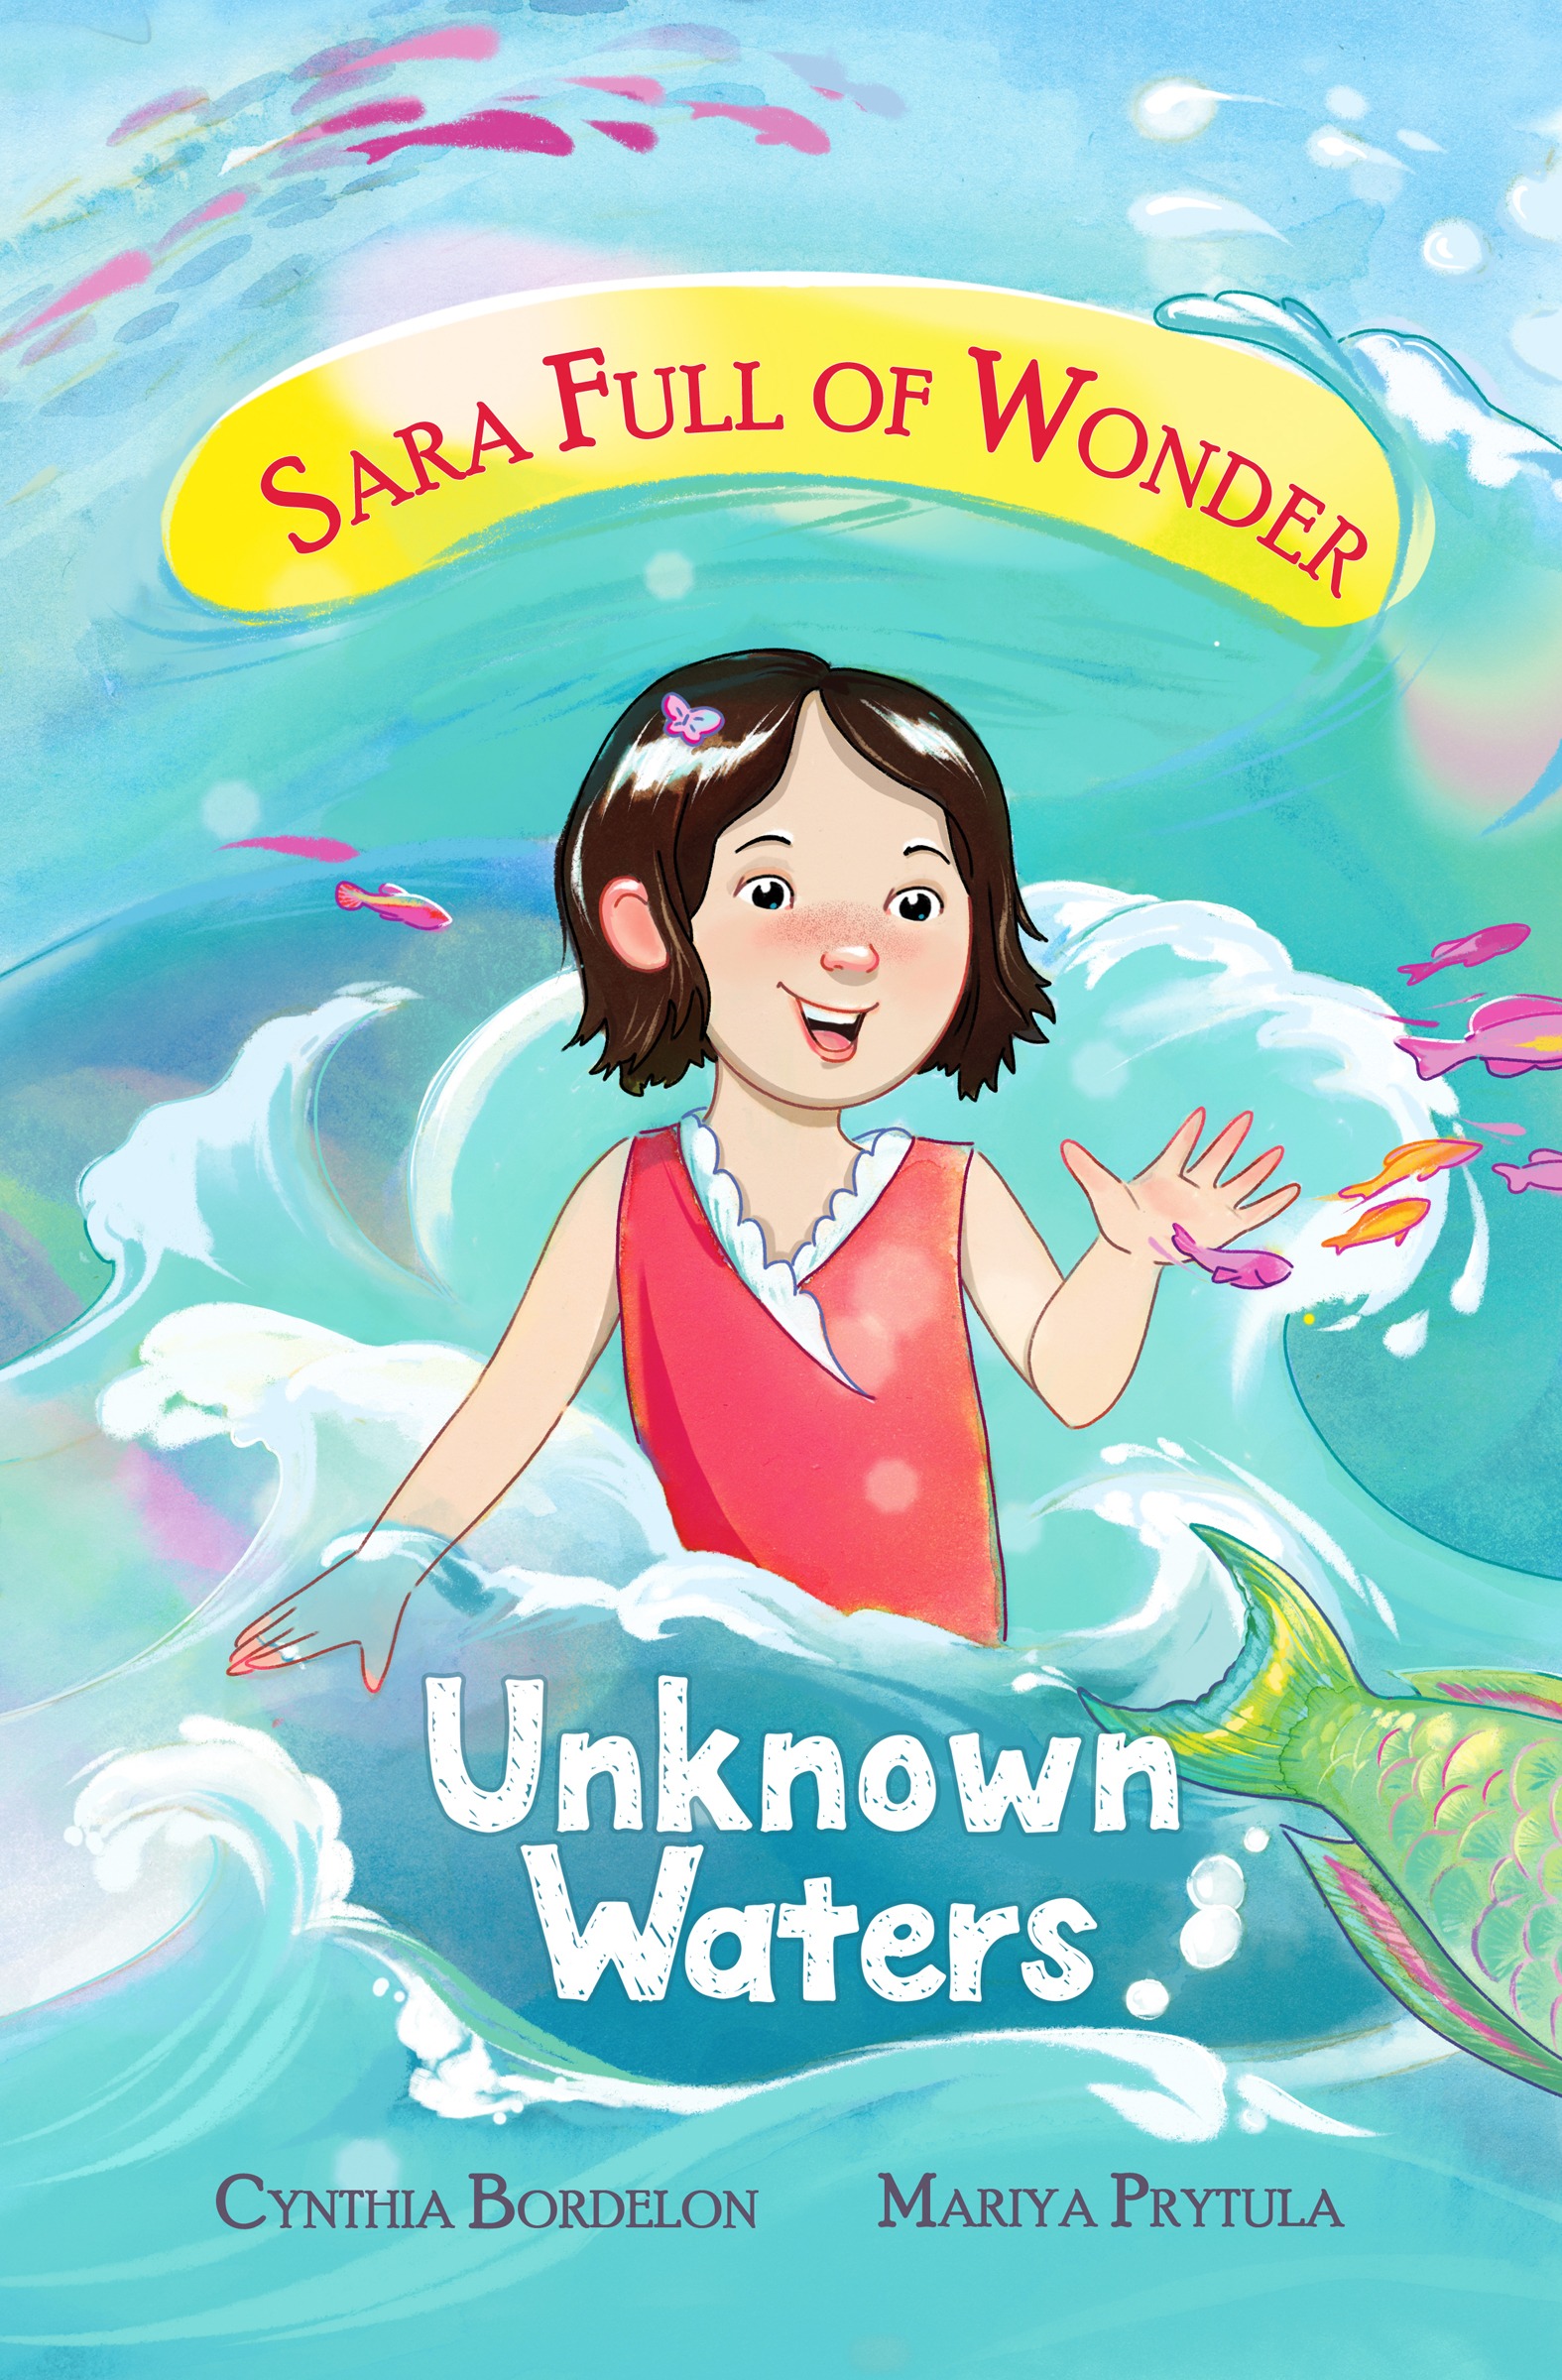 Sara Full of Wonder_Book1_front cover only RGB copy